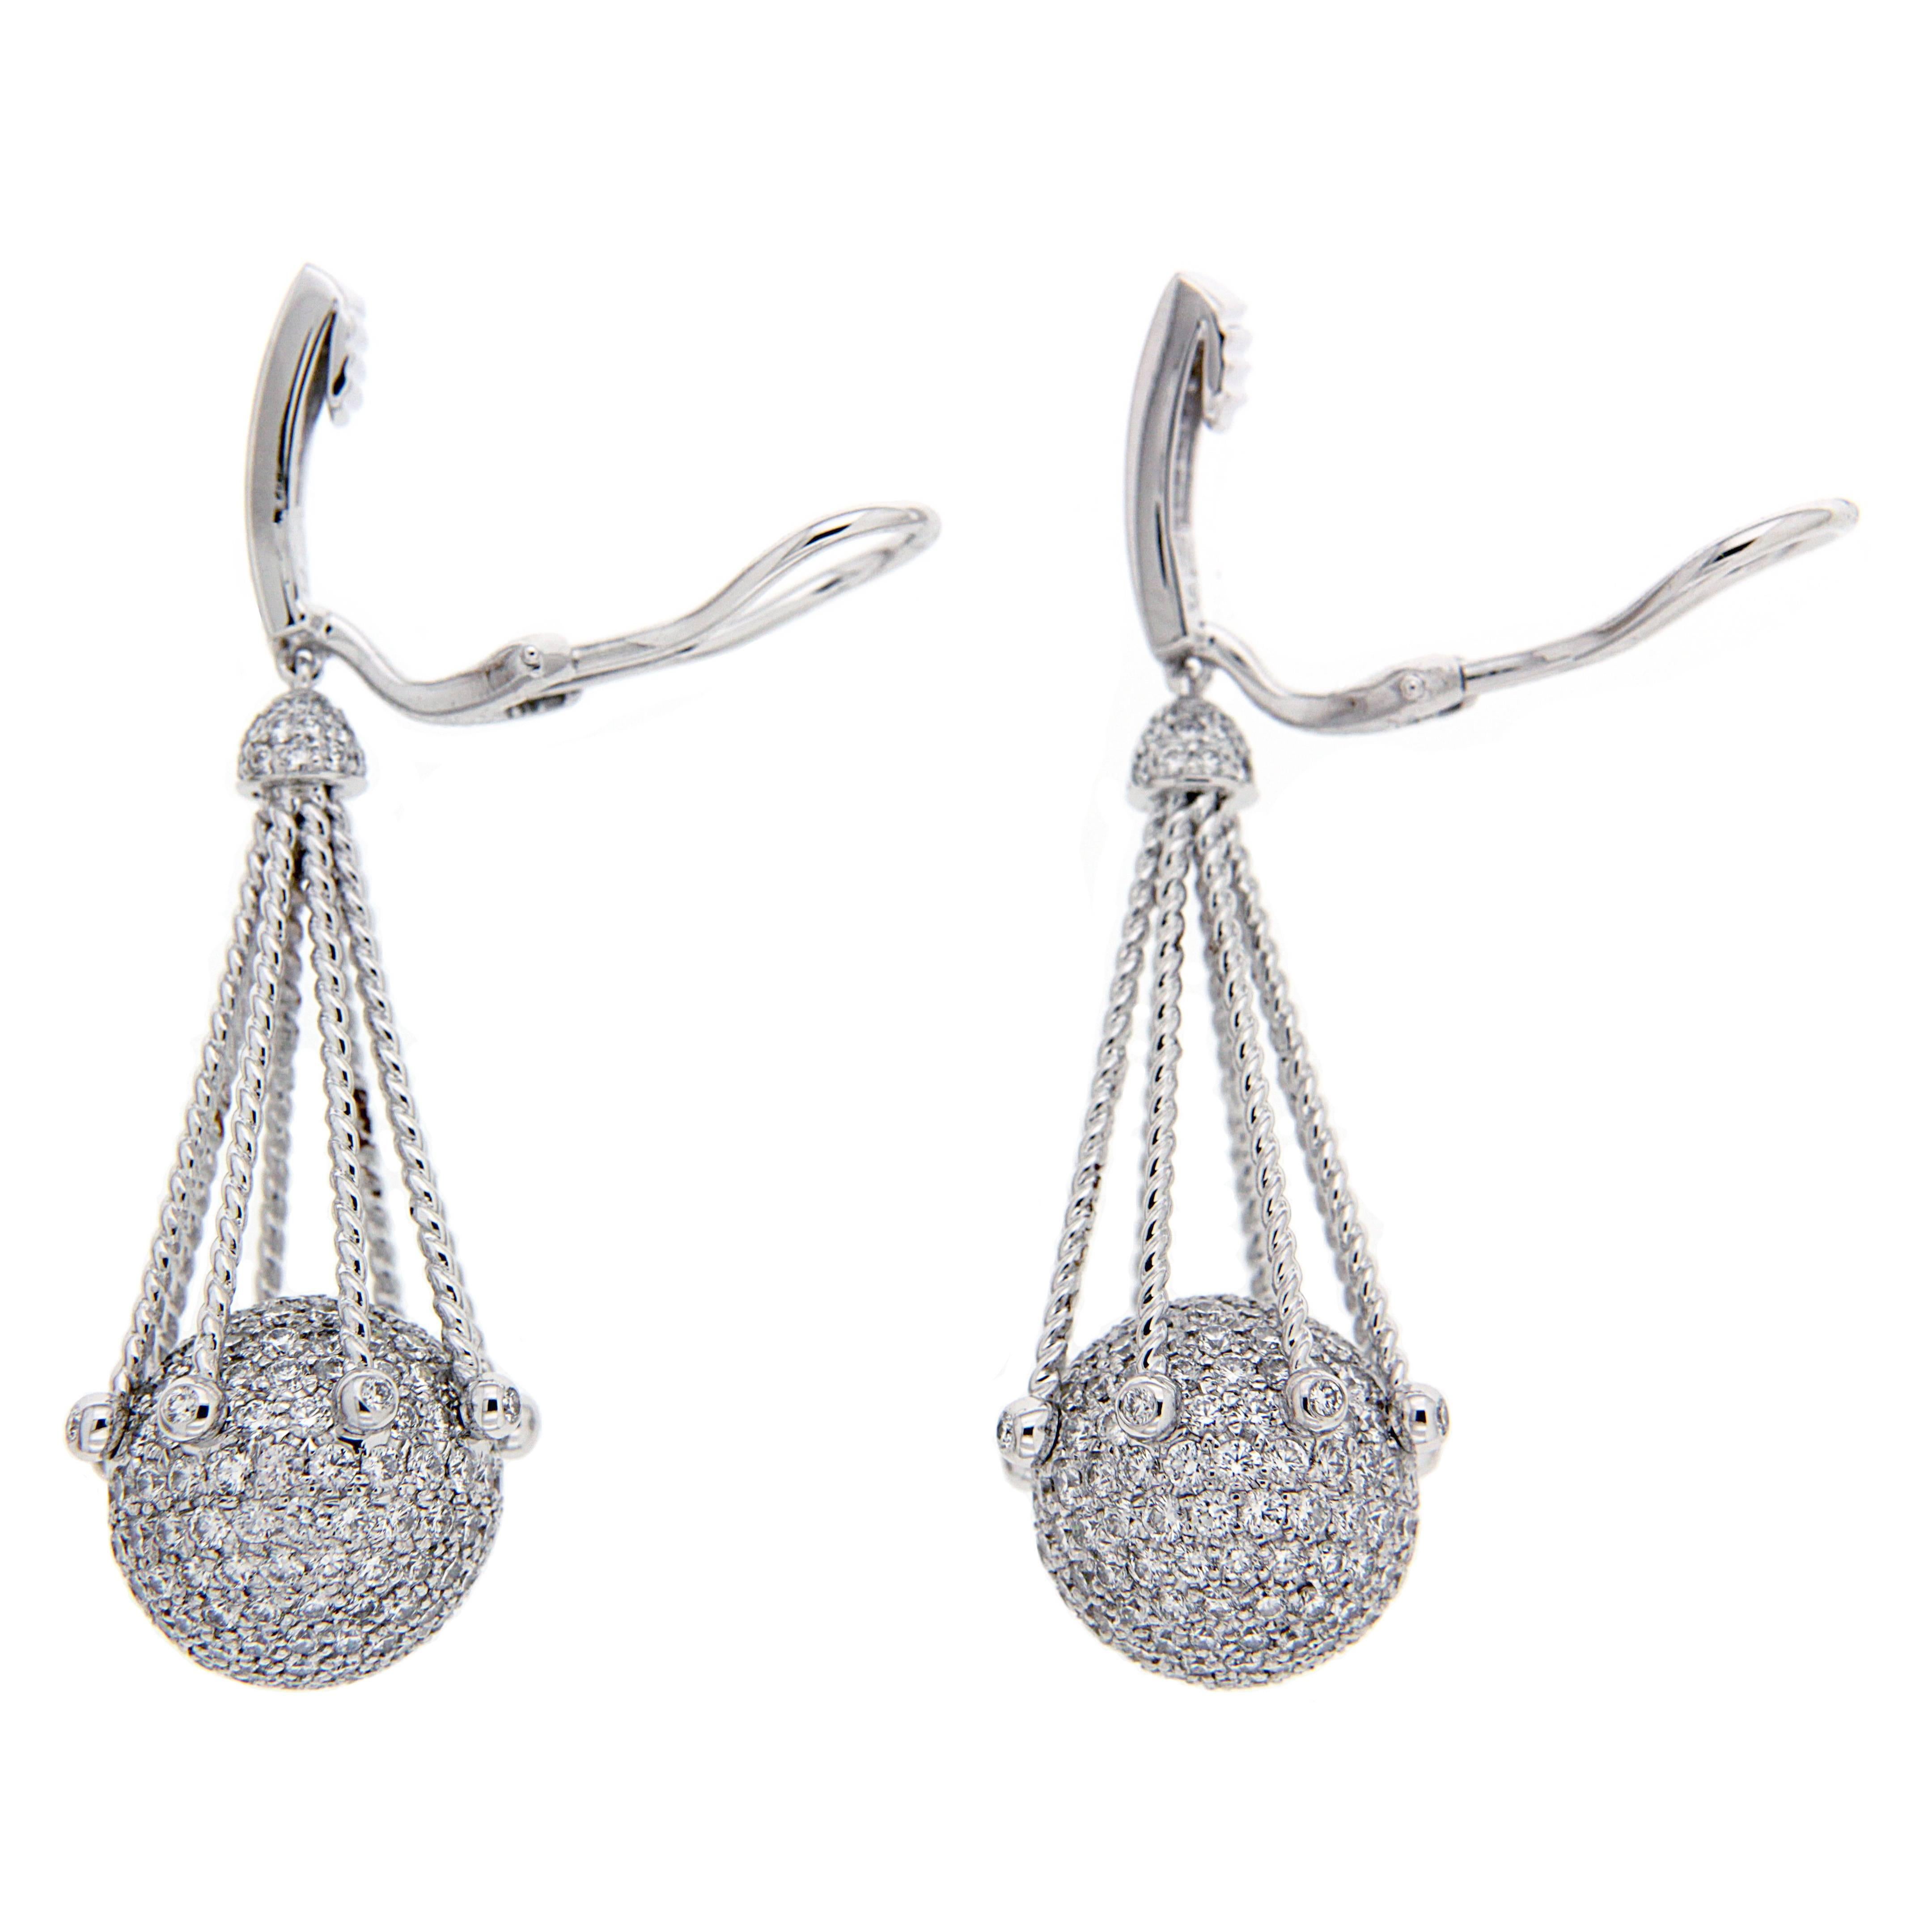 This elegant pair of earrings features pave balls with diamonds and twisted ropes accents. The earring is finished in 18kt white Gold with clip backs. Diamond total weight 6.90ctw